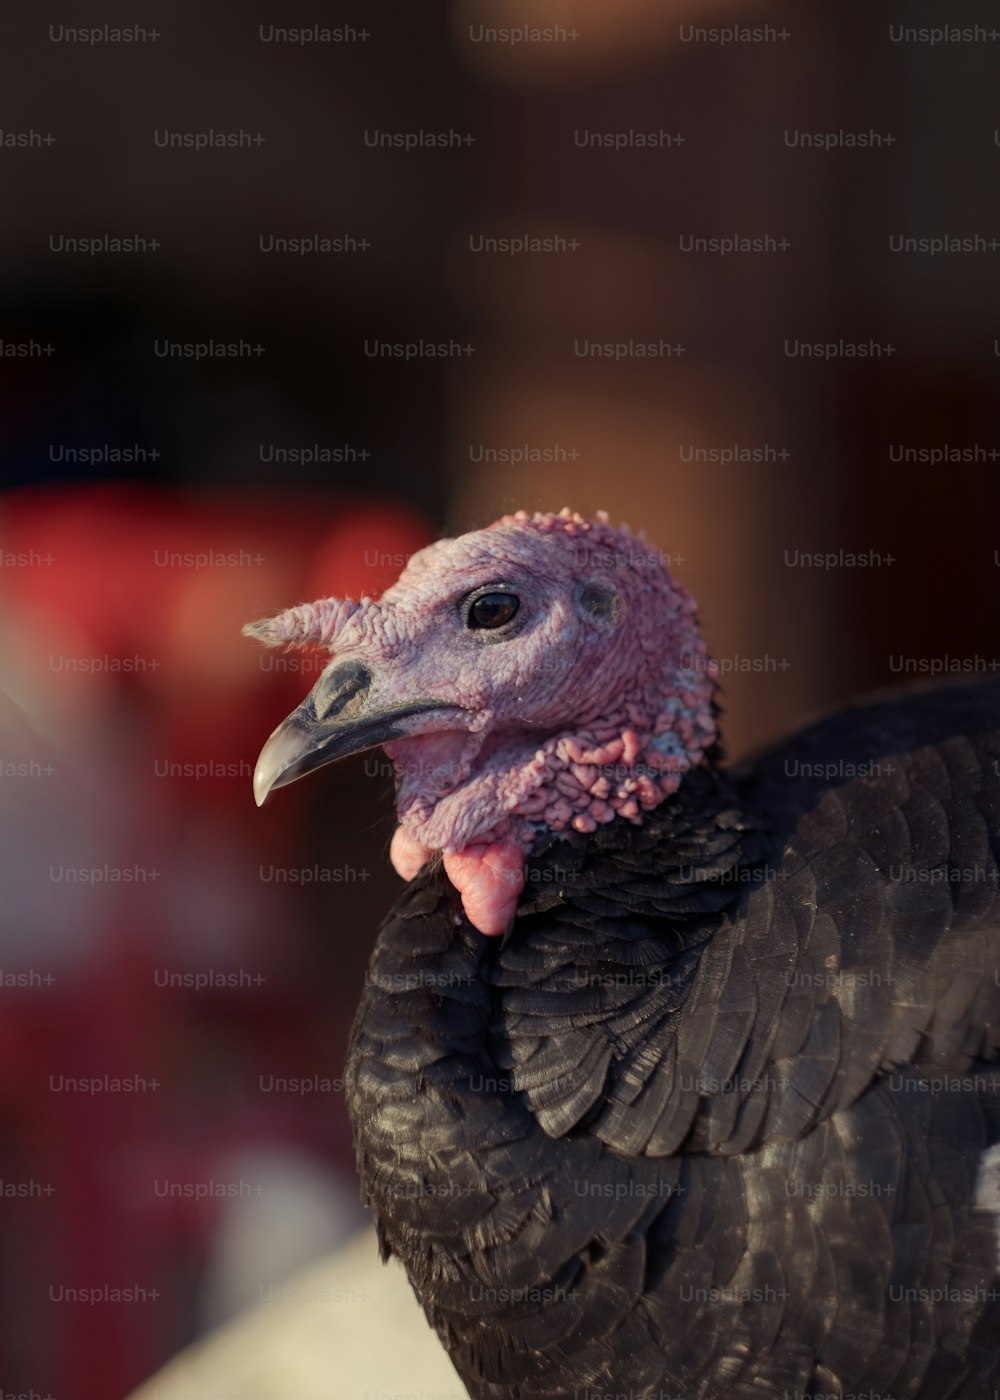 Get to Know the Birds of Turkey - 98 - Rook - Dreamstime